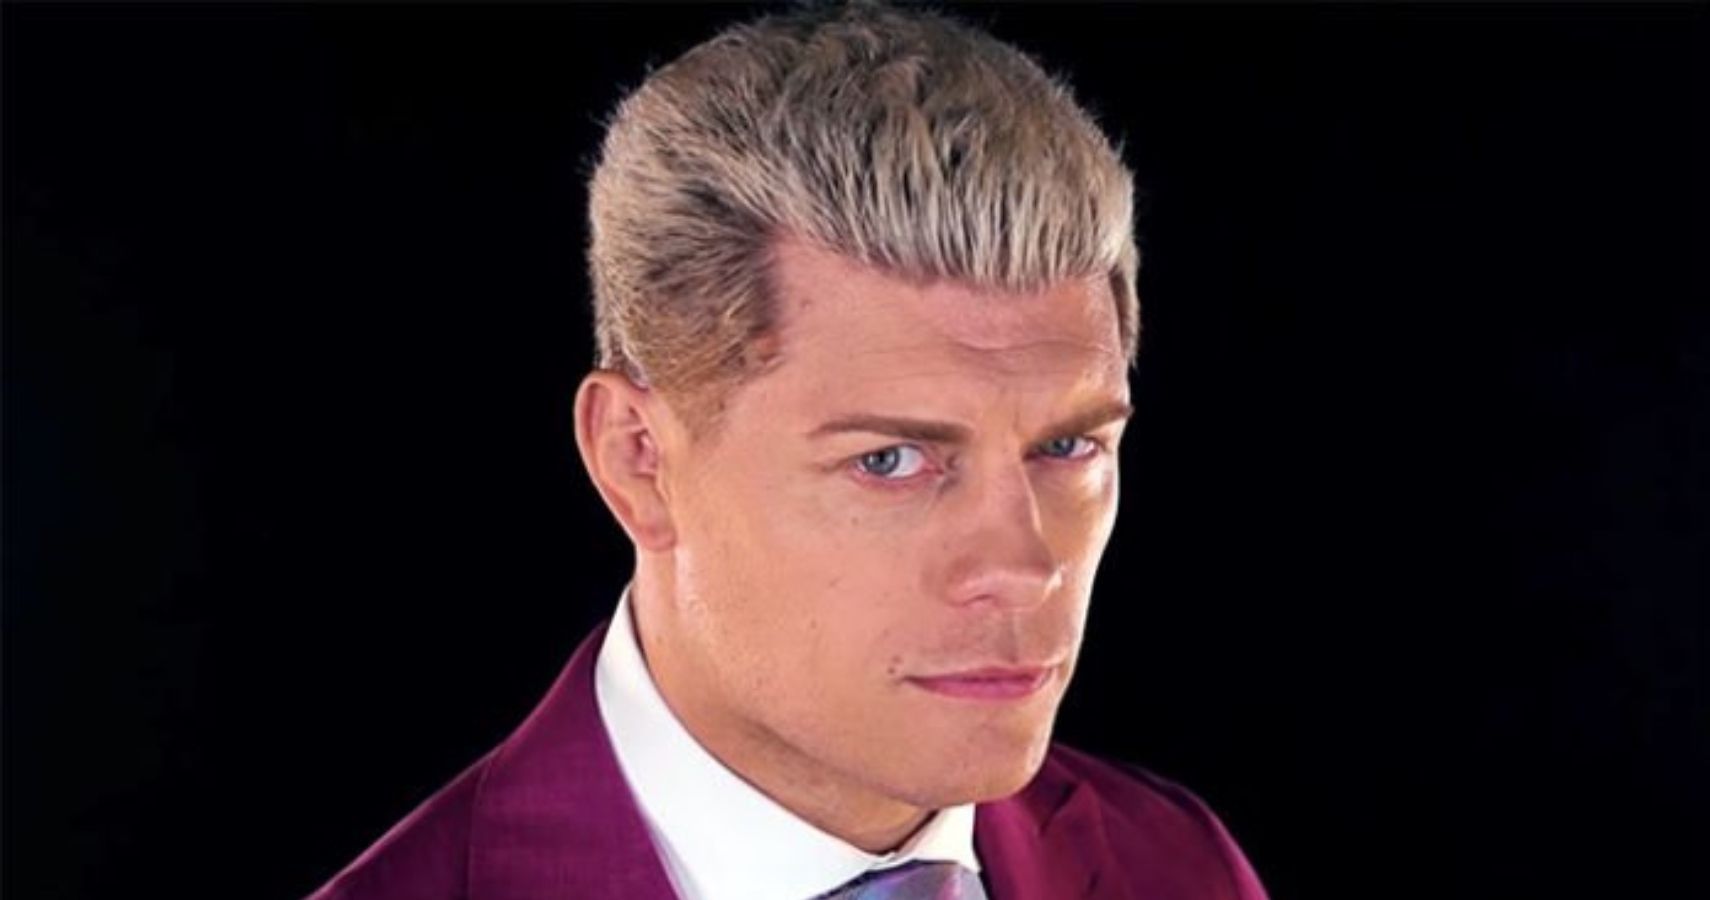 10. Cody Rhodes' Blonde Hair: A Tribute to His Father - wide 3